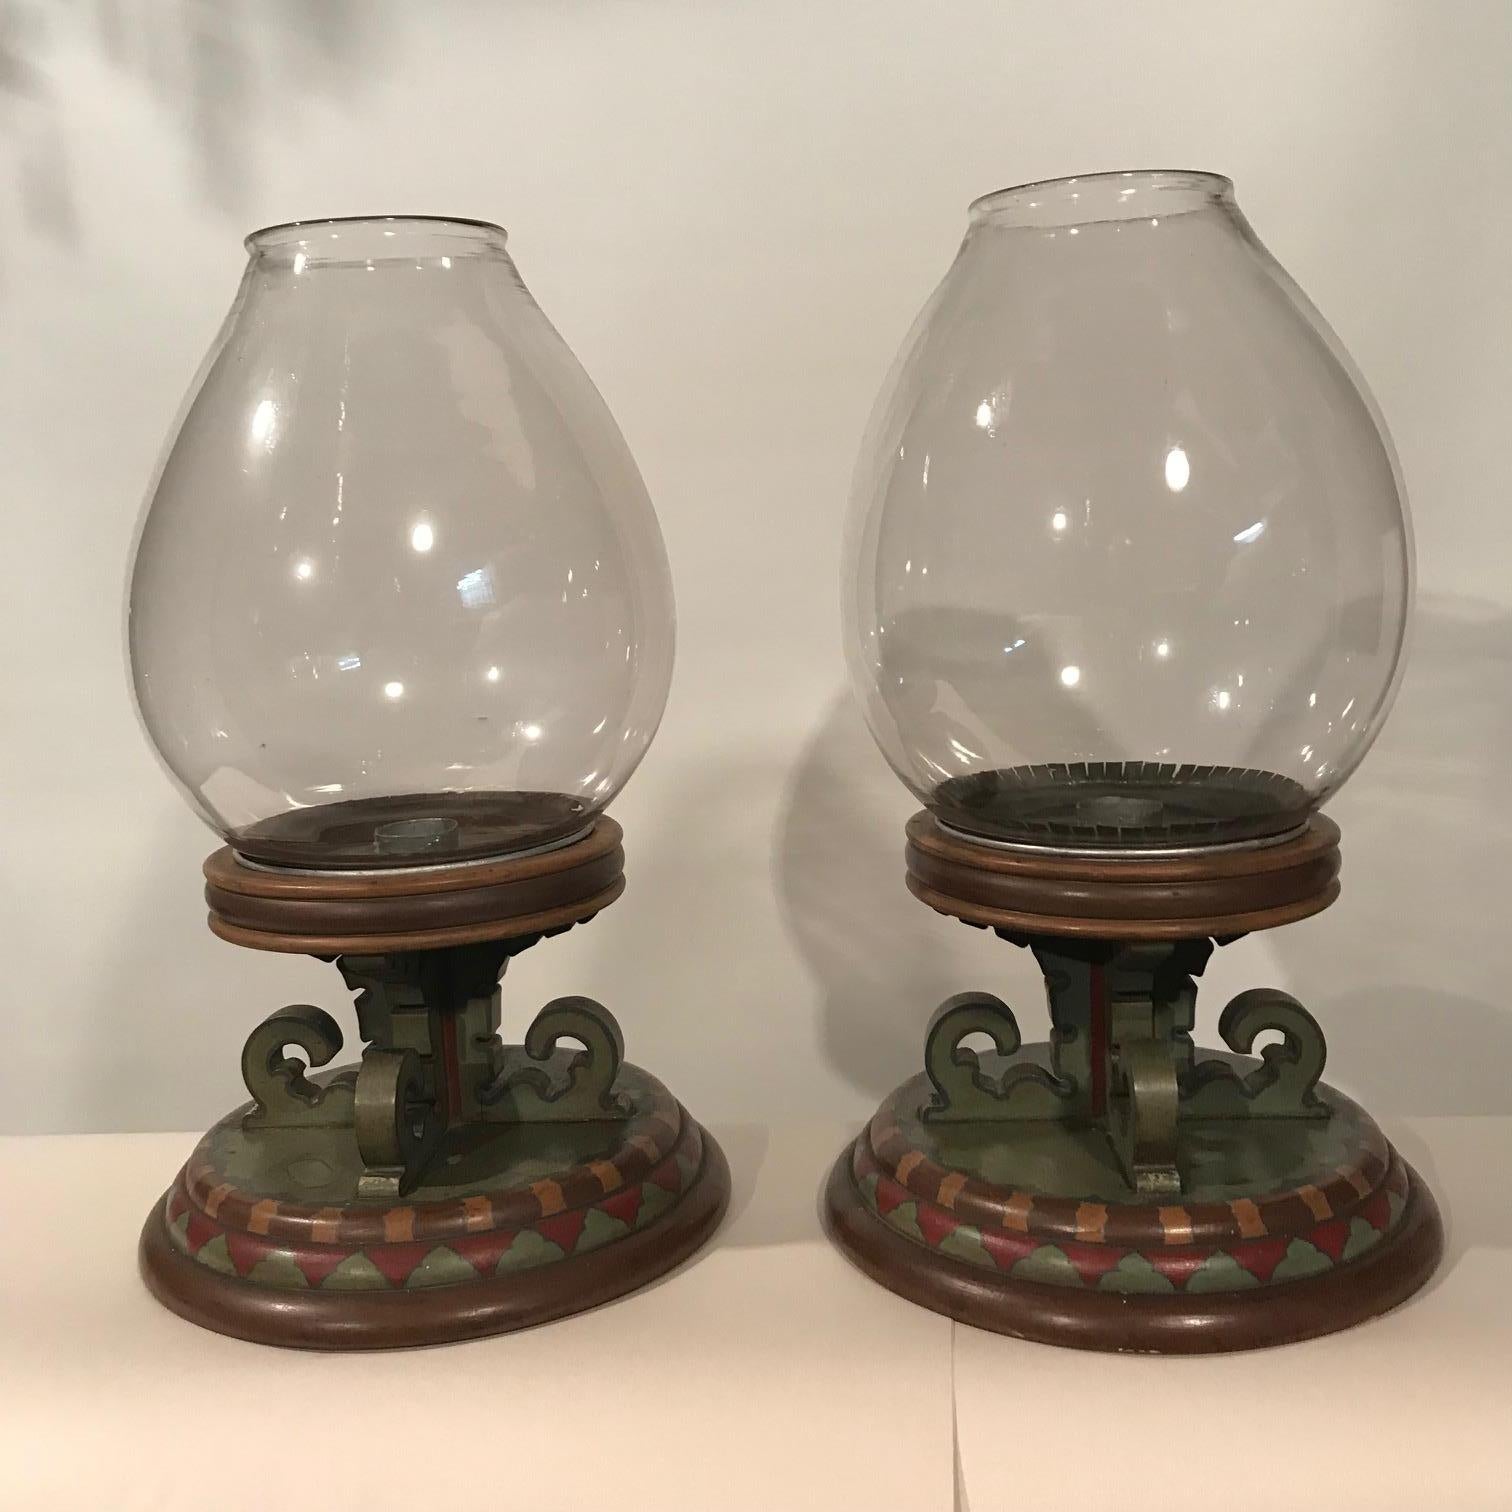 This pair of lamps are quite unlike any we have seen before. Each base is turned in three tapering sizes, supporting an elaborate fret-carved pedestal on which is seated the base of the lamp itself. Countersunk in the base is a tole drip-pan. Each